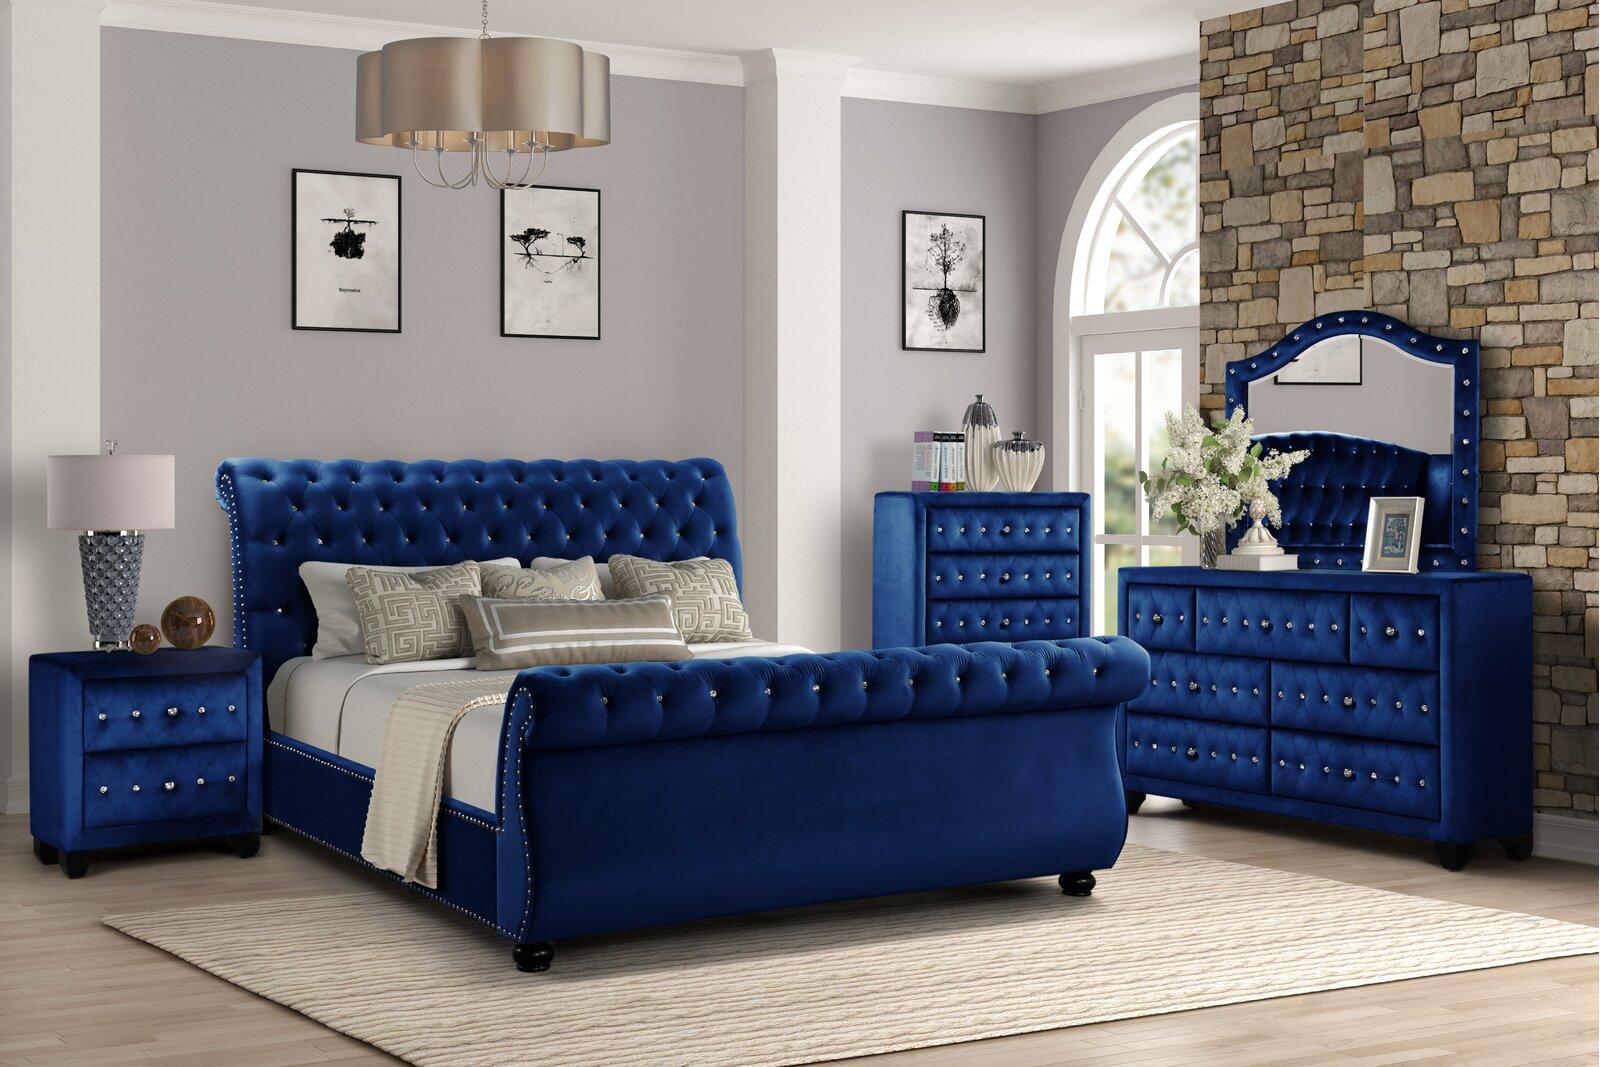 Contemporary, Modern Sleight Bedroom Set KENDALL GHF-808857847904-Set-5 in Navy 